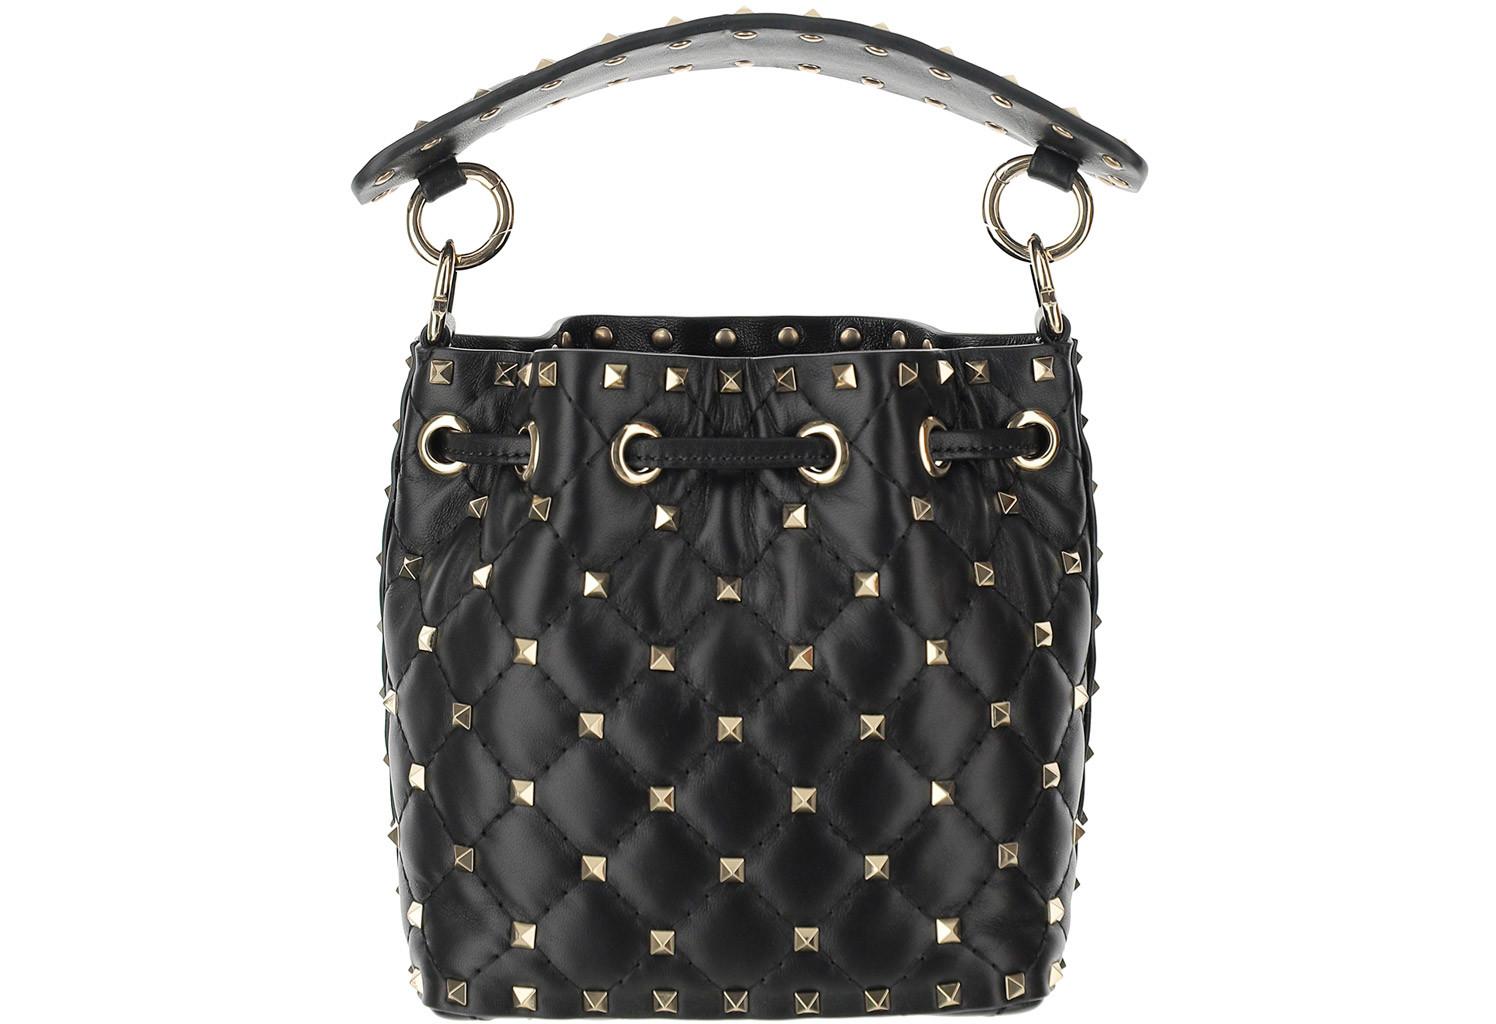 Valentino V-Ring Black Leather Tote Bag at FORZIERI